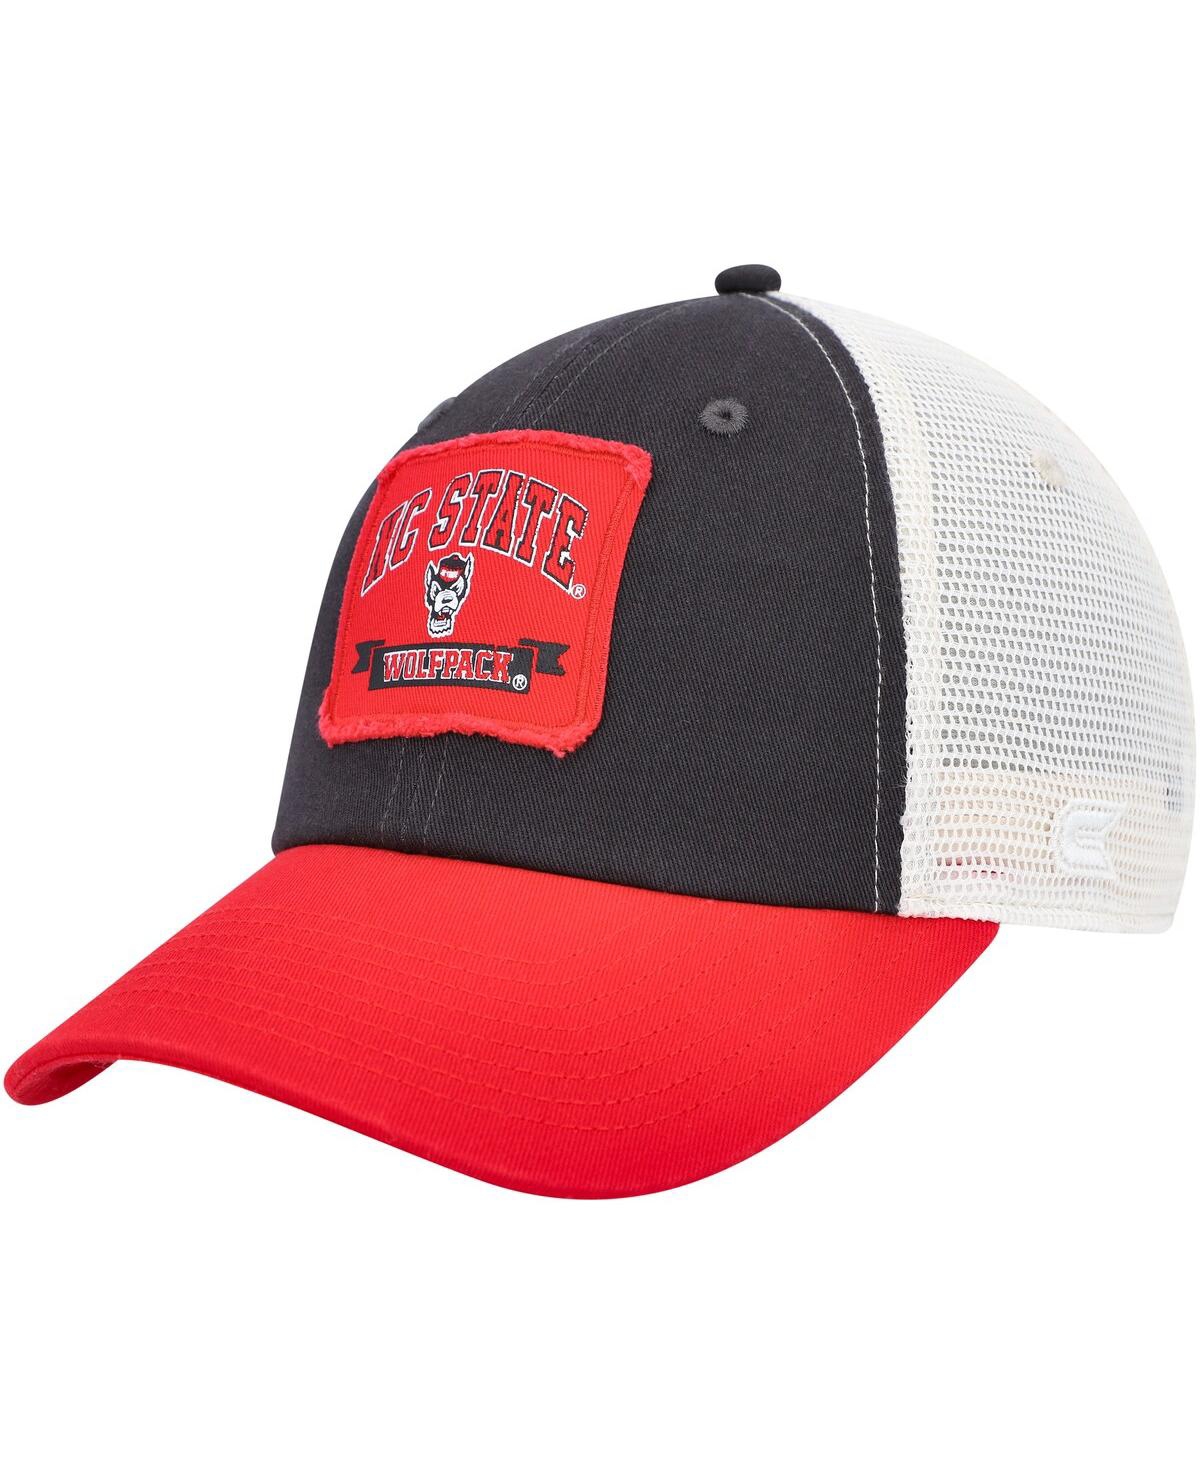 Shop Colosseum Men's  Charcoal Nc State Wolfpack Objection Snapback Hat